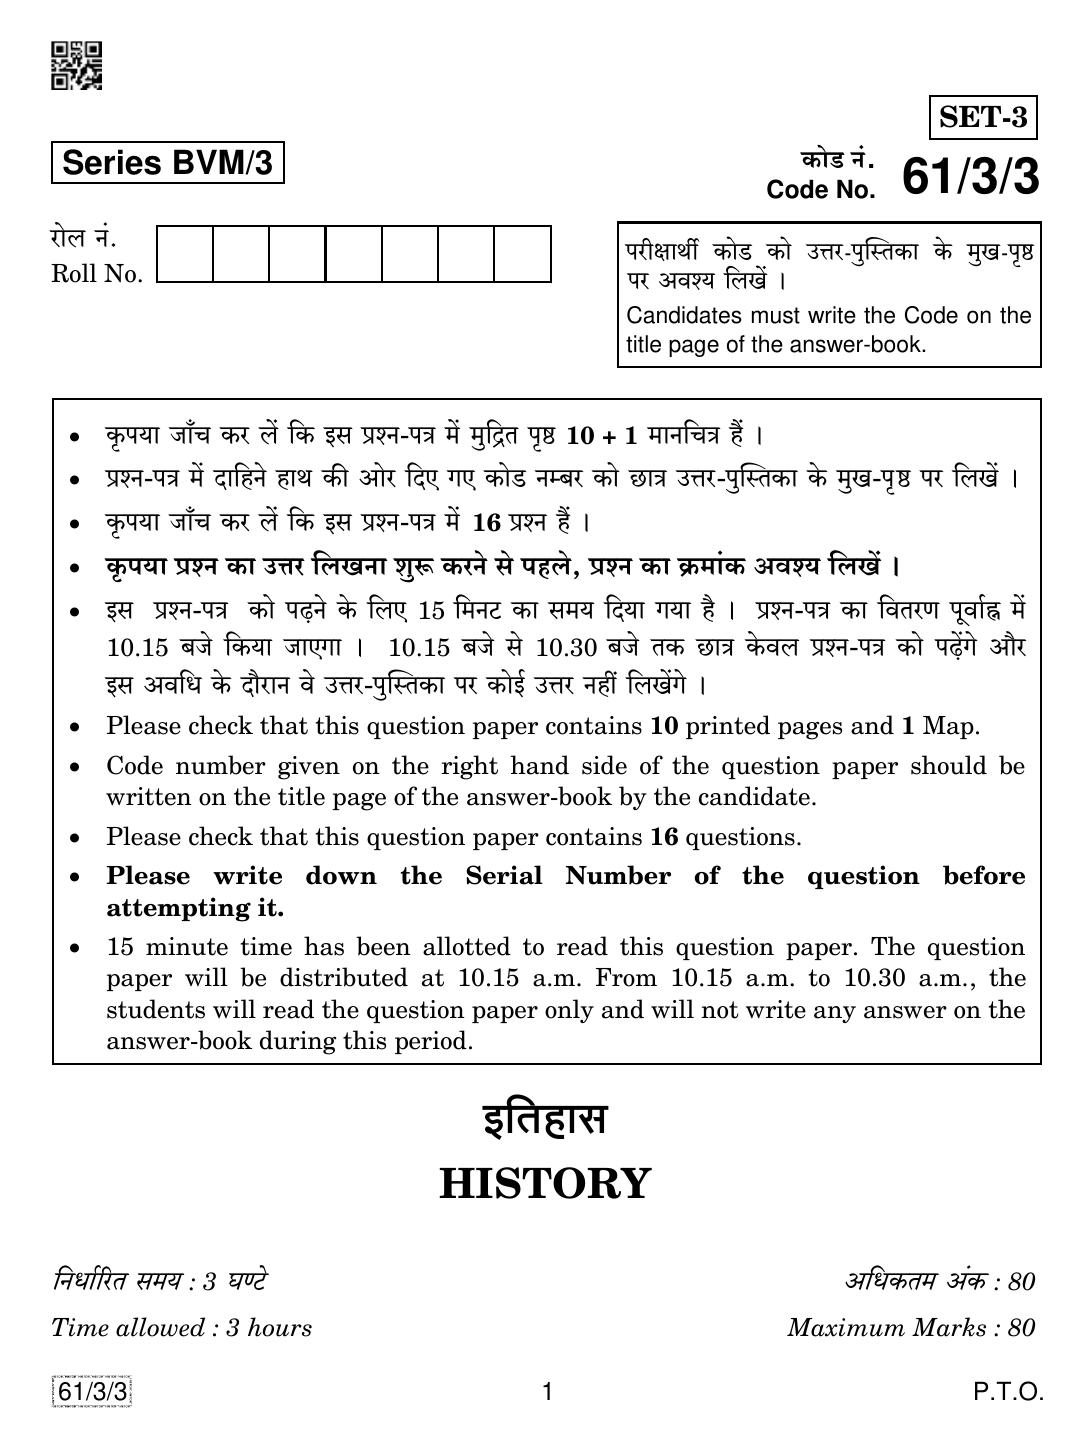 CBSE Class 12 61-3-3 History 2019 Question Paper - Page 1